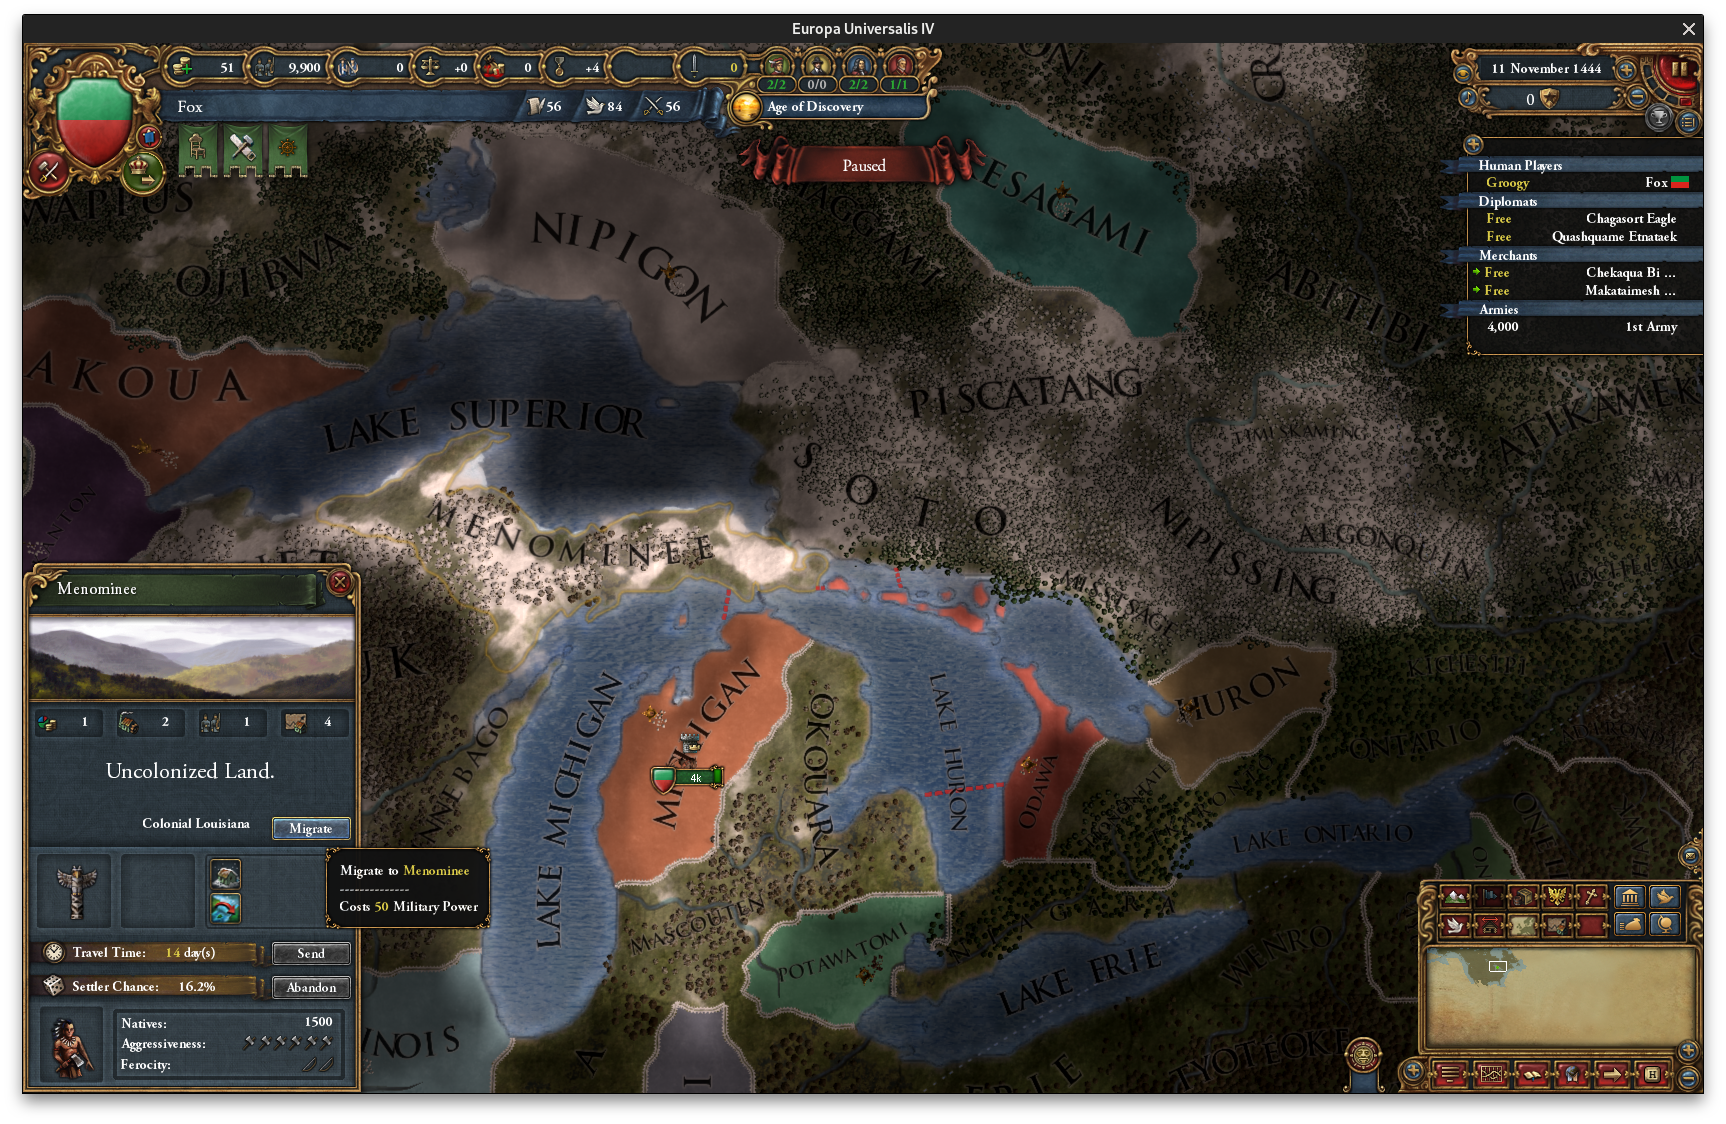 Europa Universalis IV: Free to play until Sept 15, and 75% off